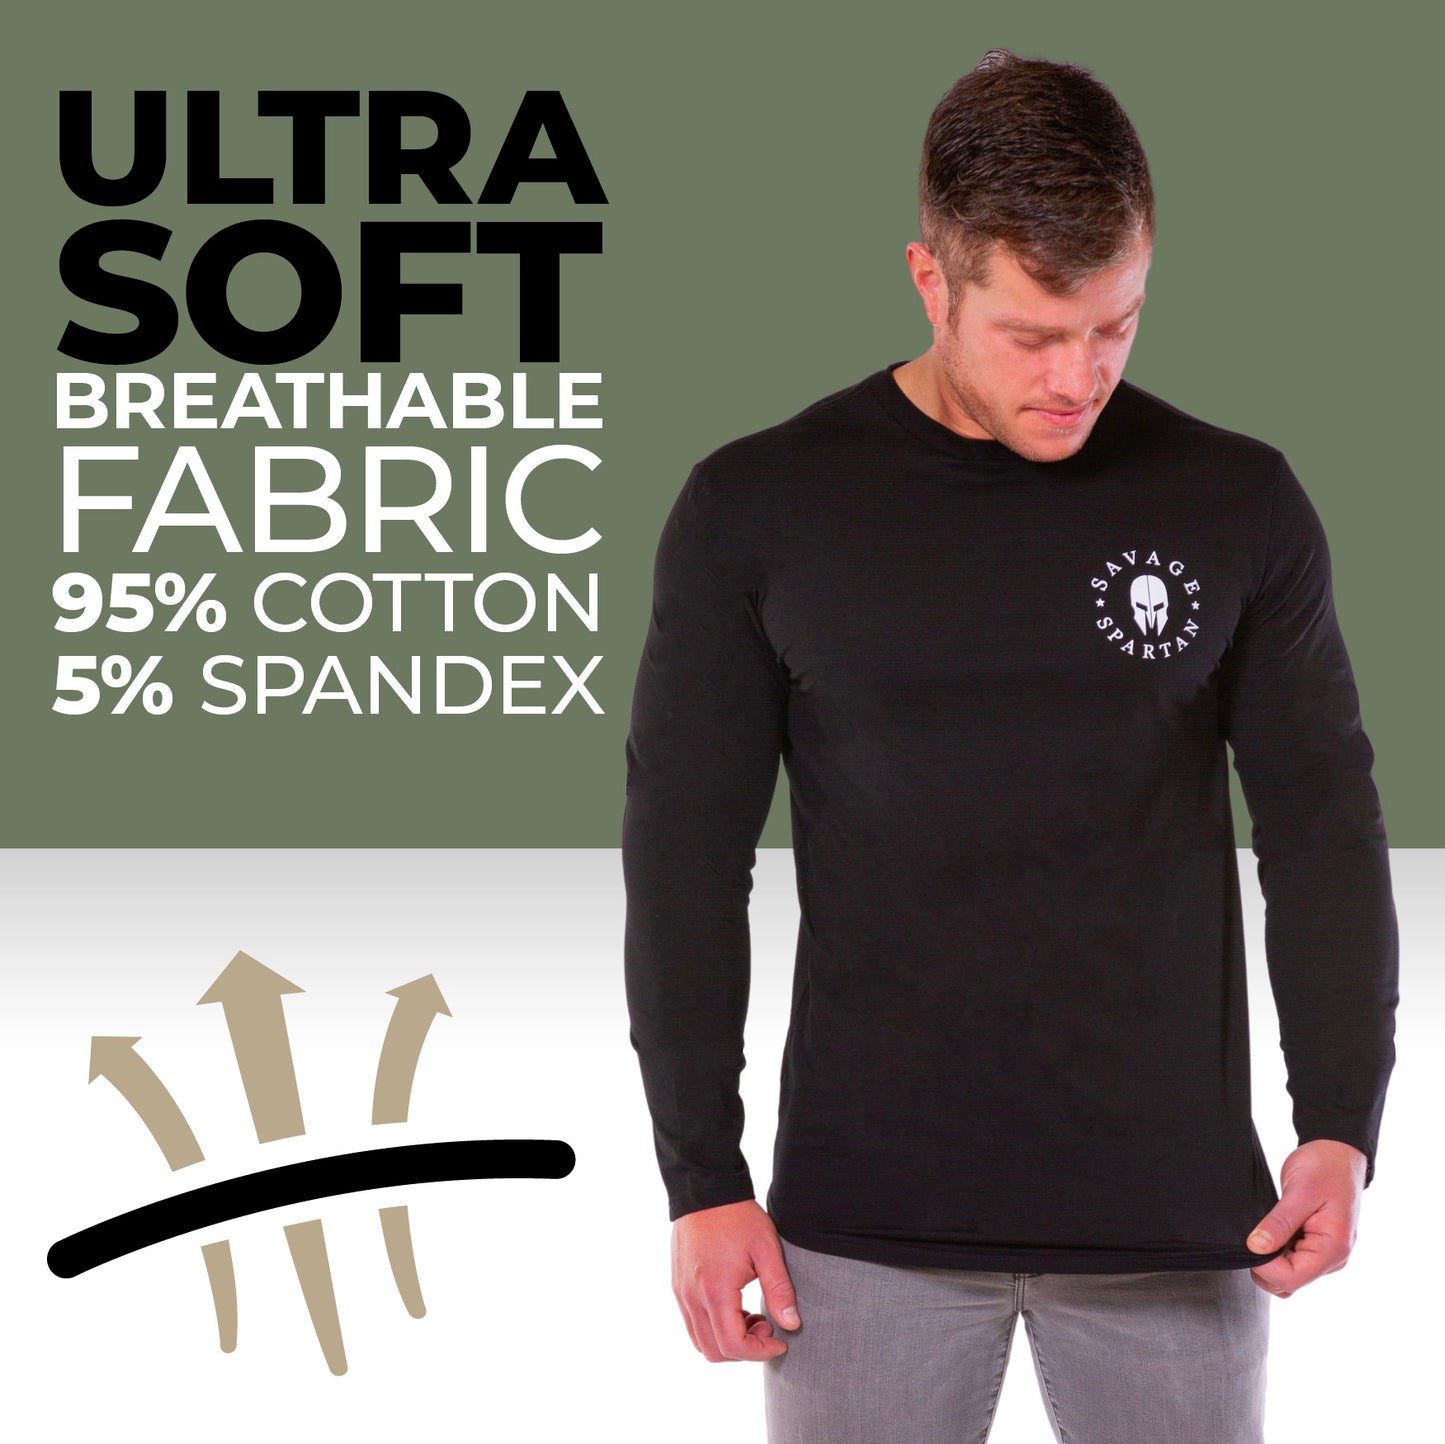 The savage spartan mens tactical long sleeve shirt is made of a cotton spandex blend making it quick drying